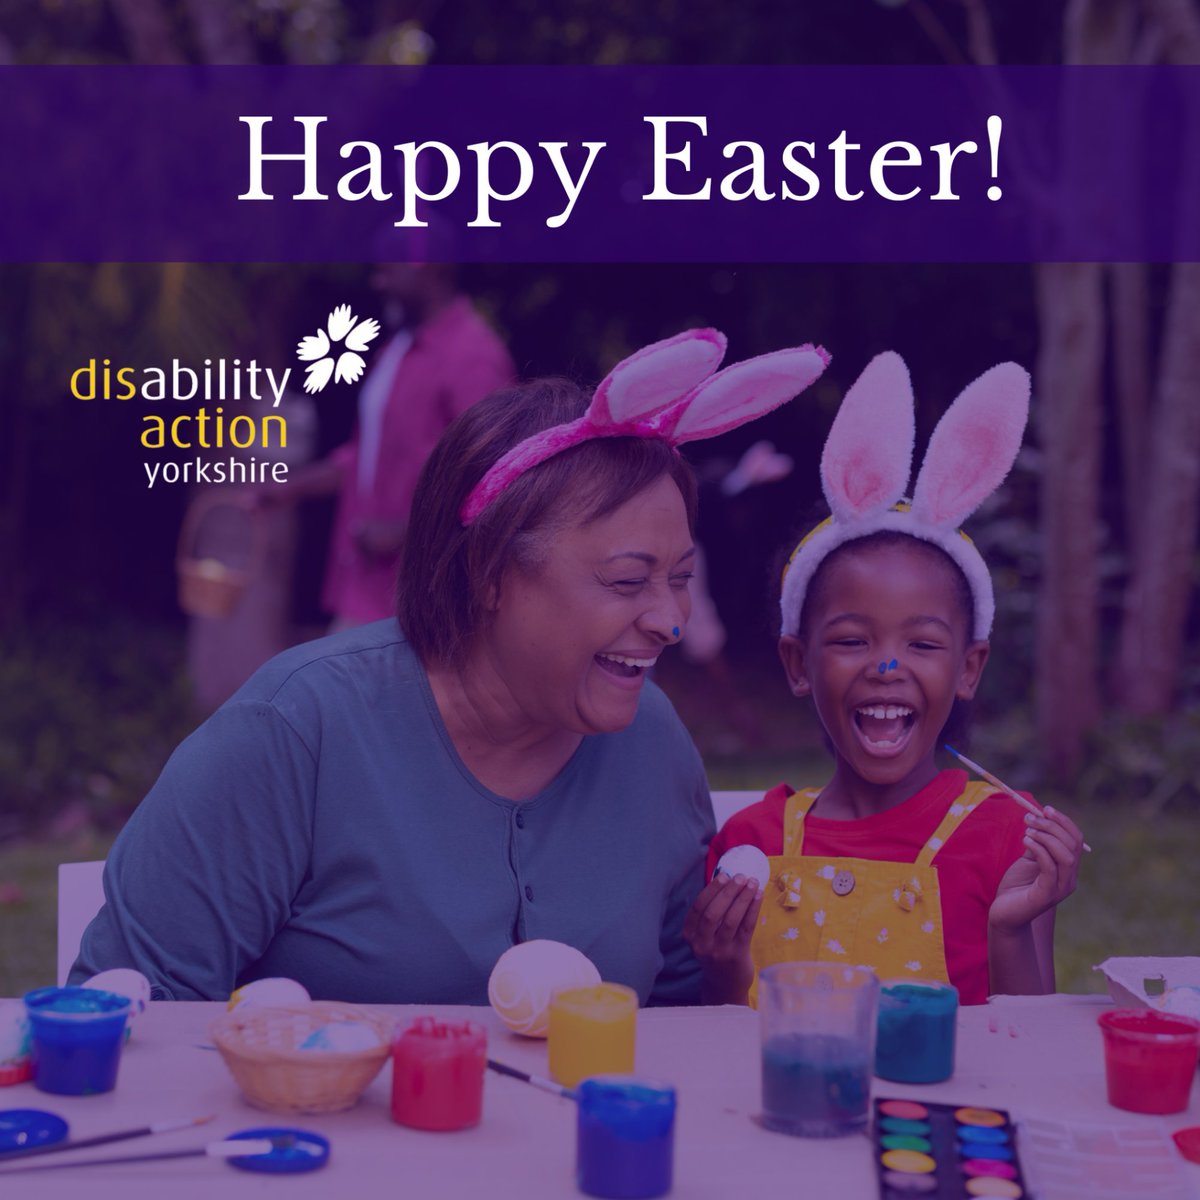 Happy Easter! We hope you're all having a lovely Easter weekend and are celebrating with family and friends. Whether you’re hunting for easter eggs or eating them, we hope you have an amazing time! #DAY #DisabilityActionYorkshire #HappyEaster